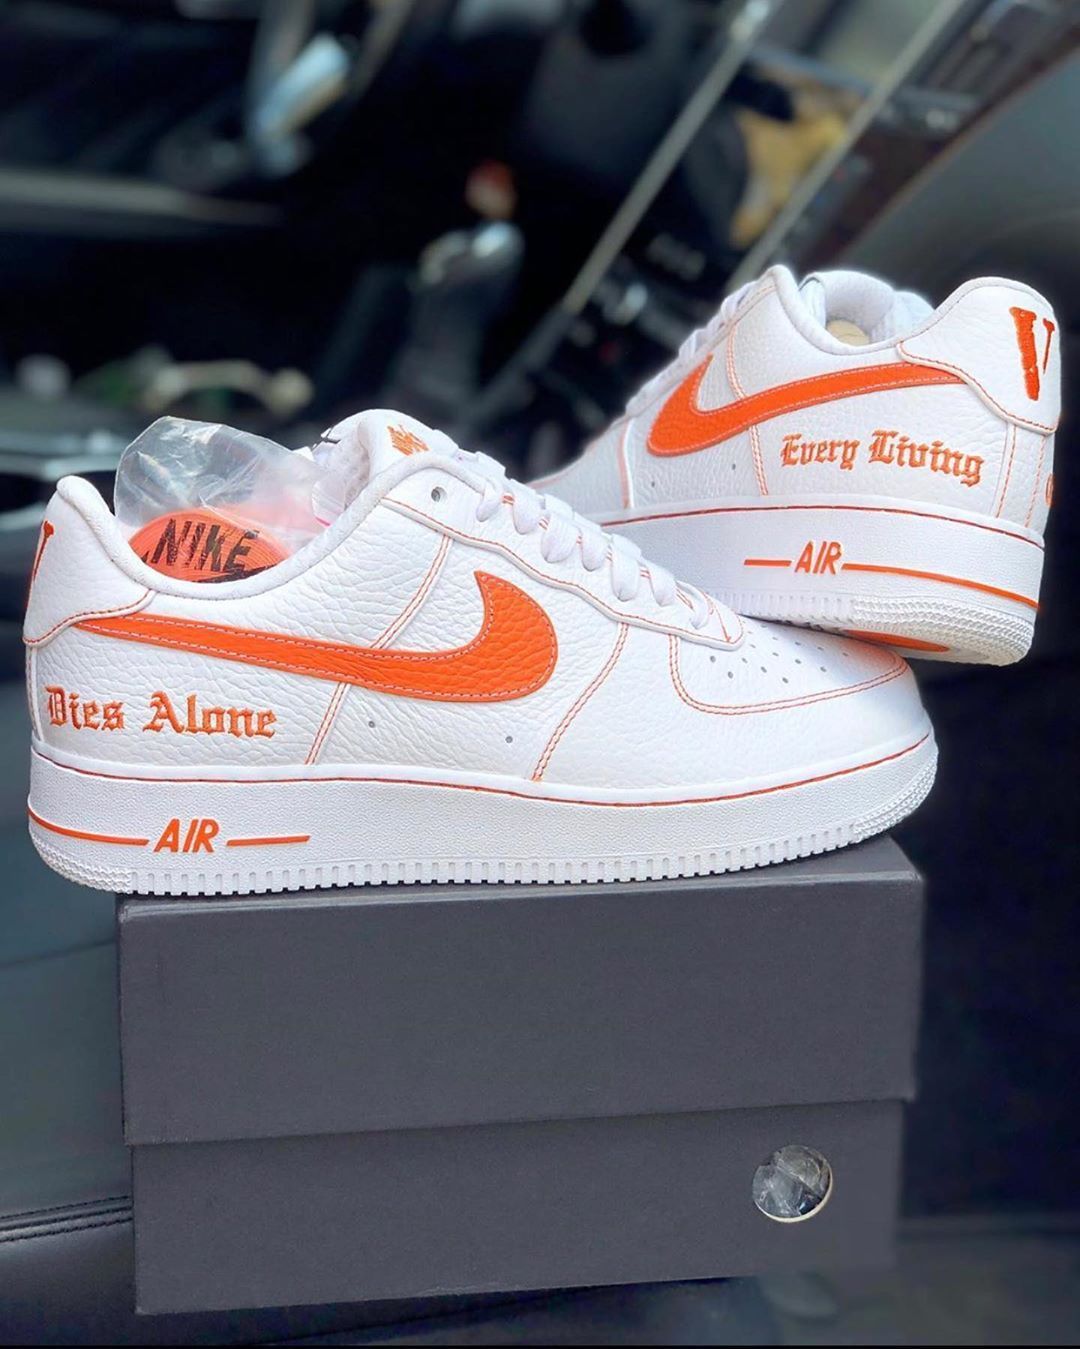 on Twitter: "VLONE x Air Force 1 samples /